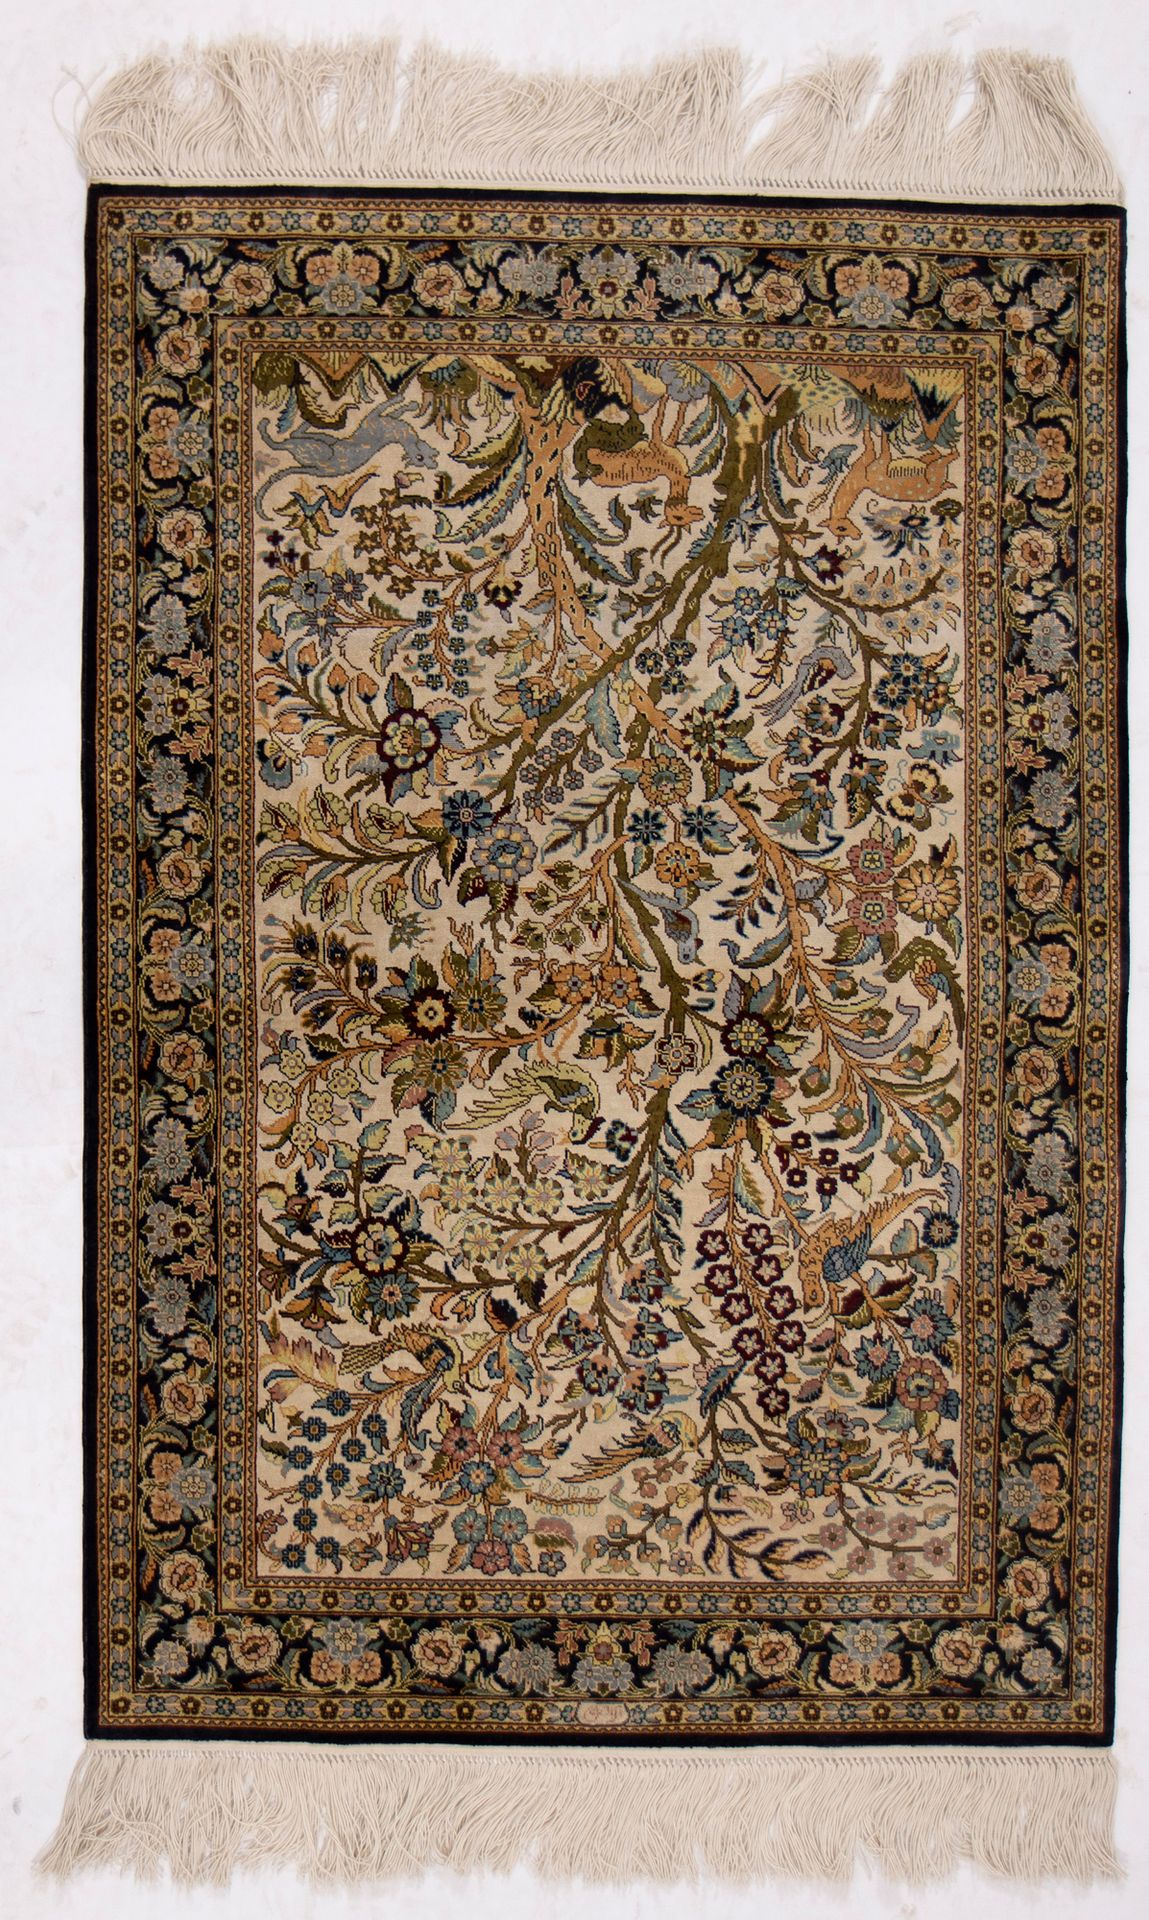 Null Tapis d'Orient
Tapis Oosters
93 x 62 cm